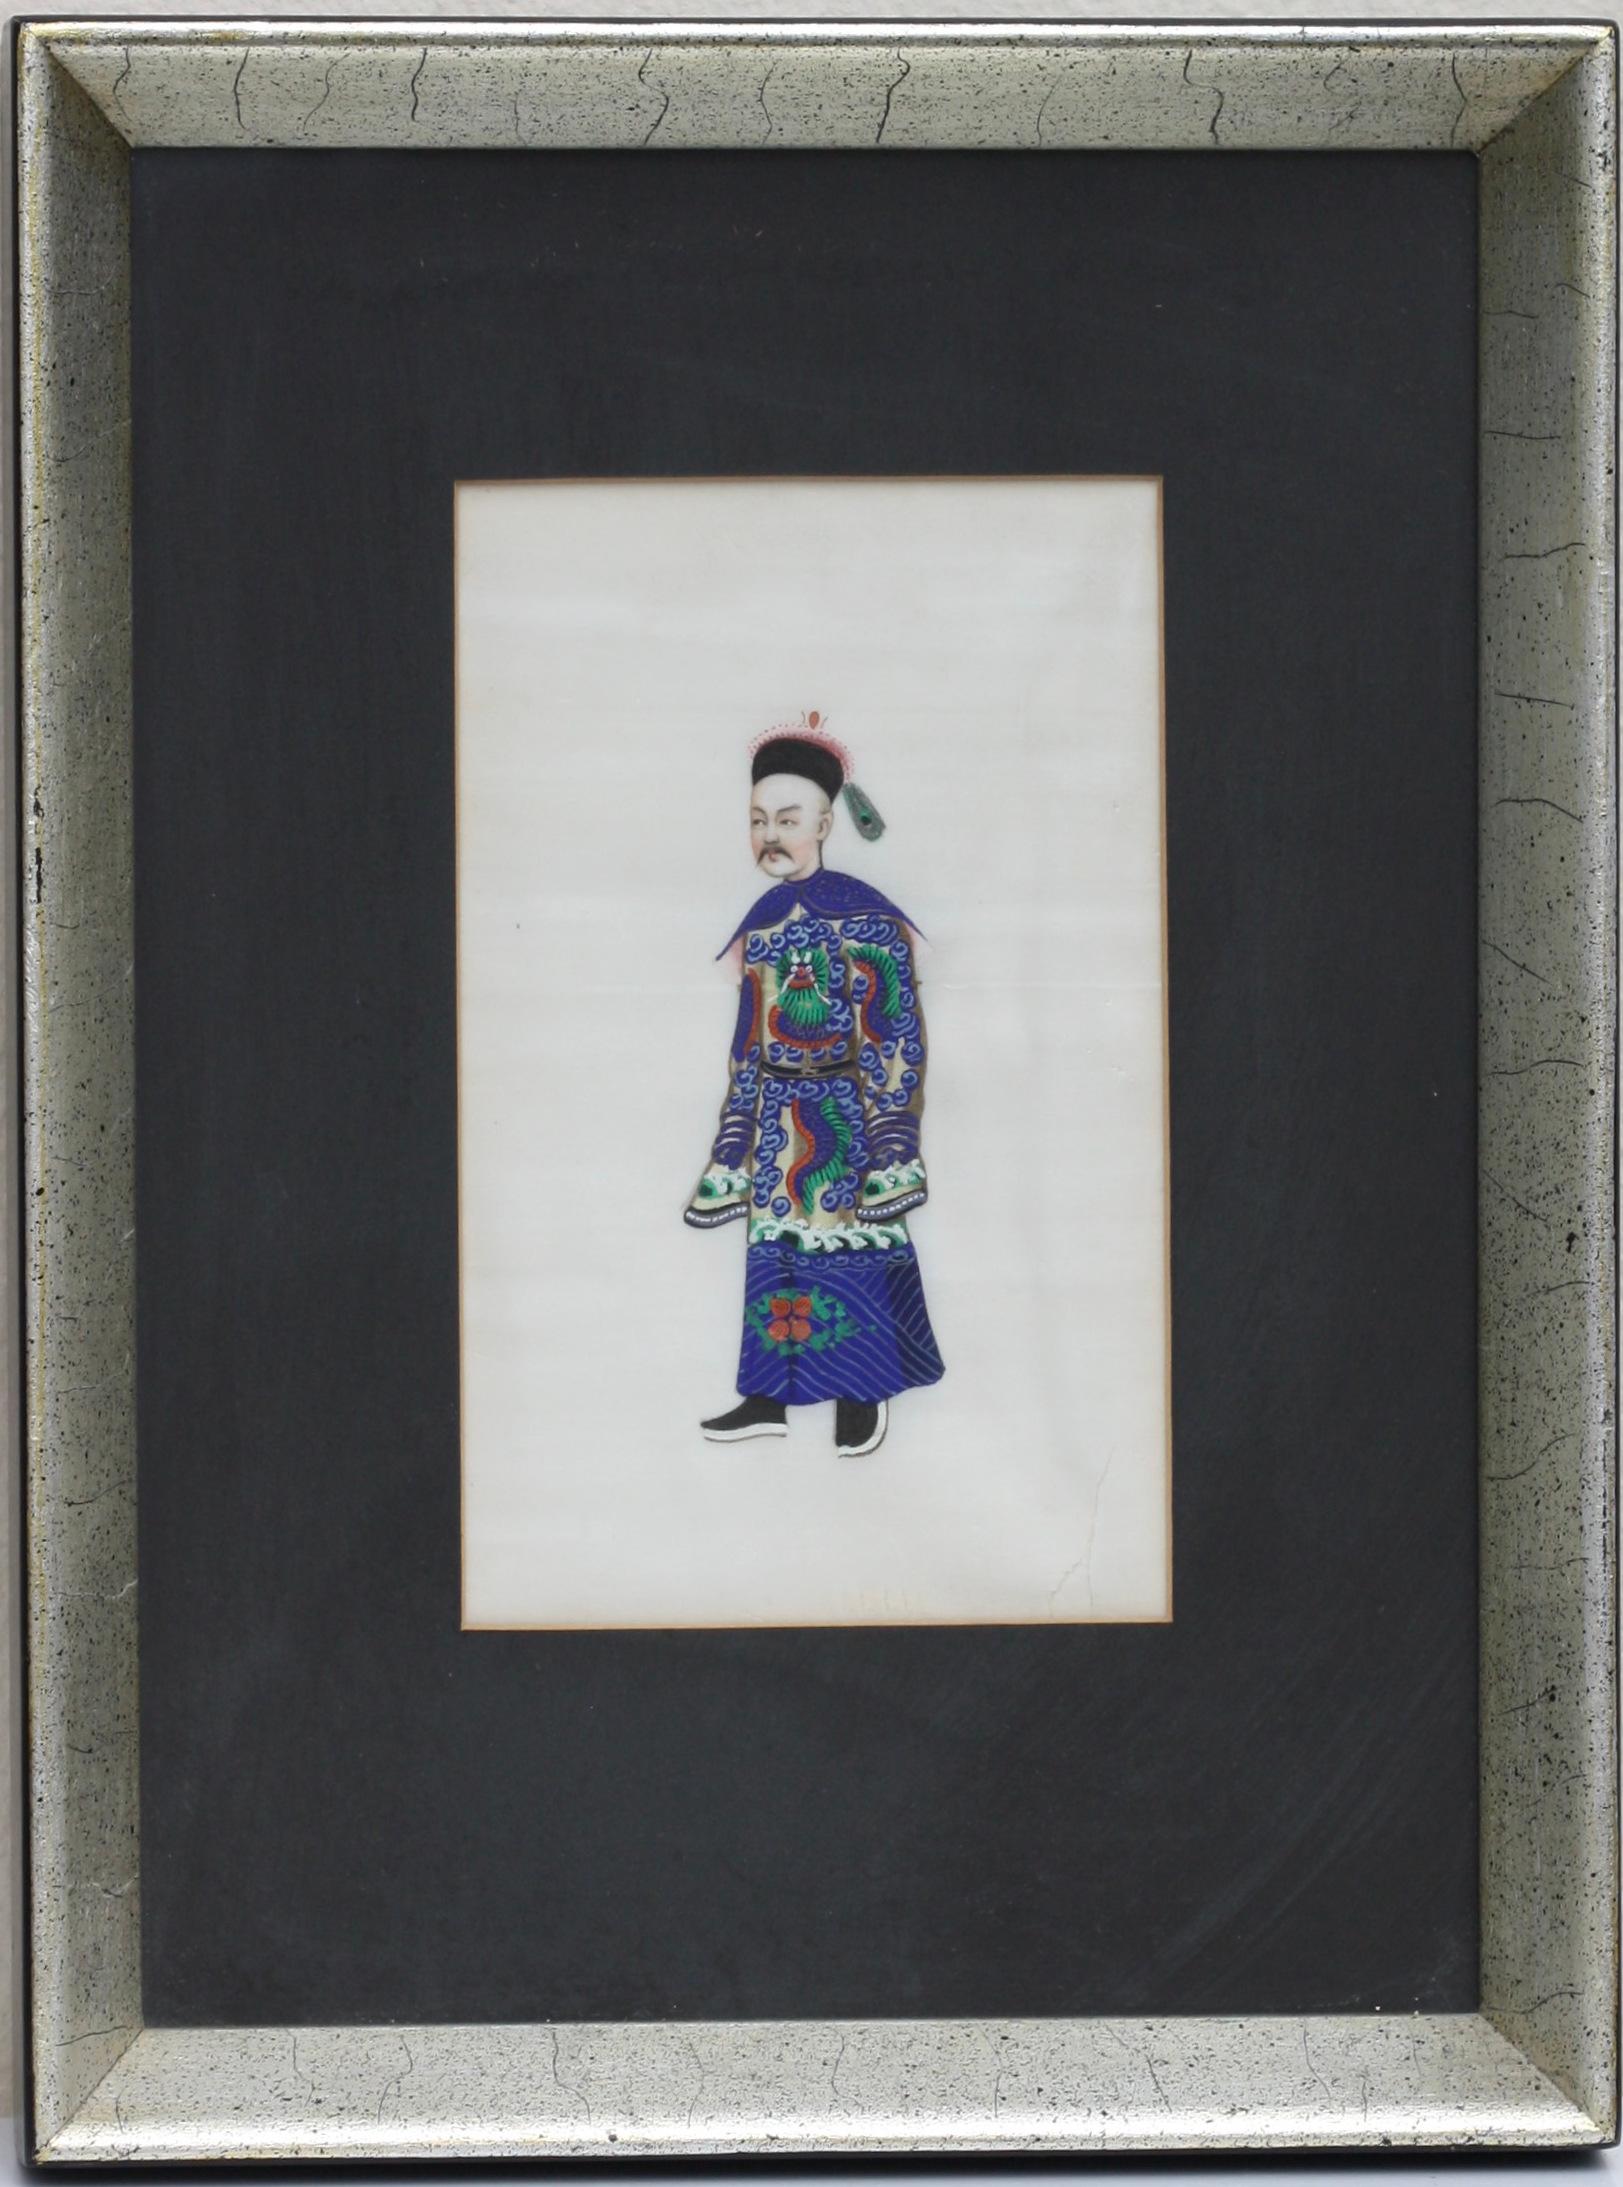 Three Chinese Watercolors 
19th Century
each titled on verso
Inferior Mandarin
Governer General, his lady
Prime Minister
size with frame
9 by 12 inches
Provenance:
John Highland
Montclair, N.J.